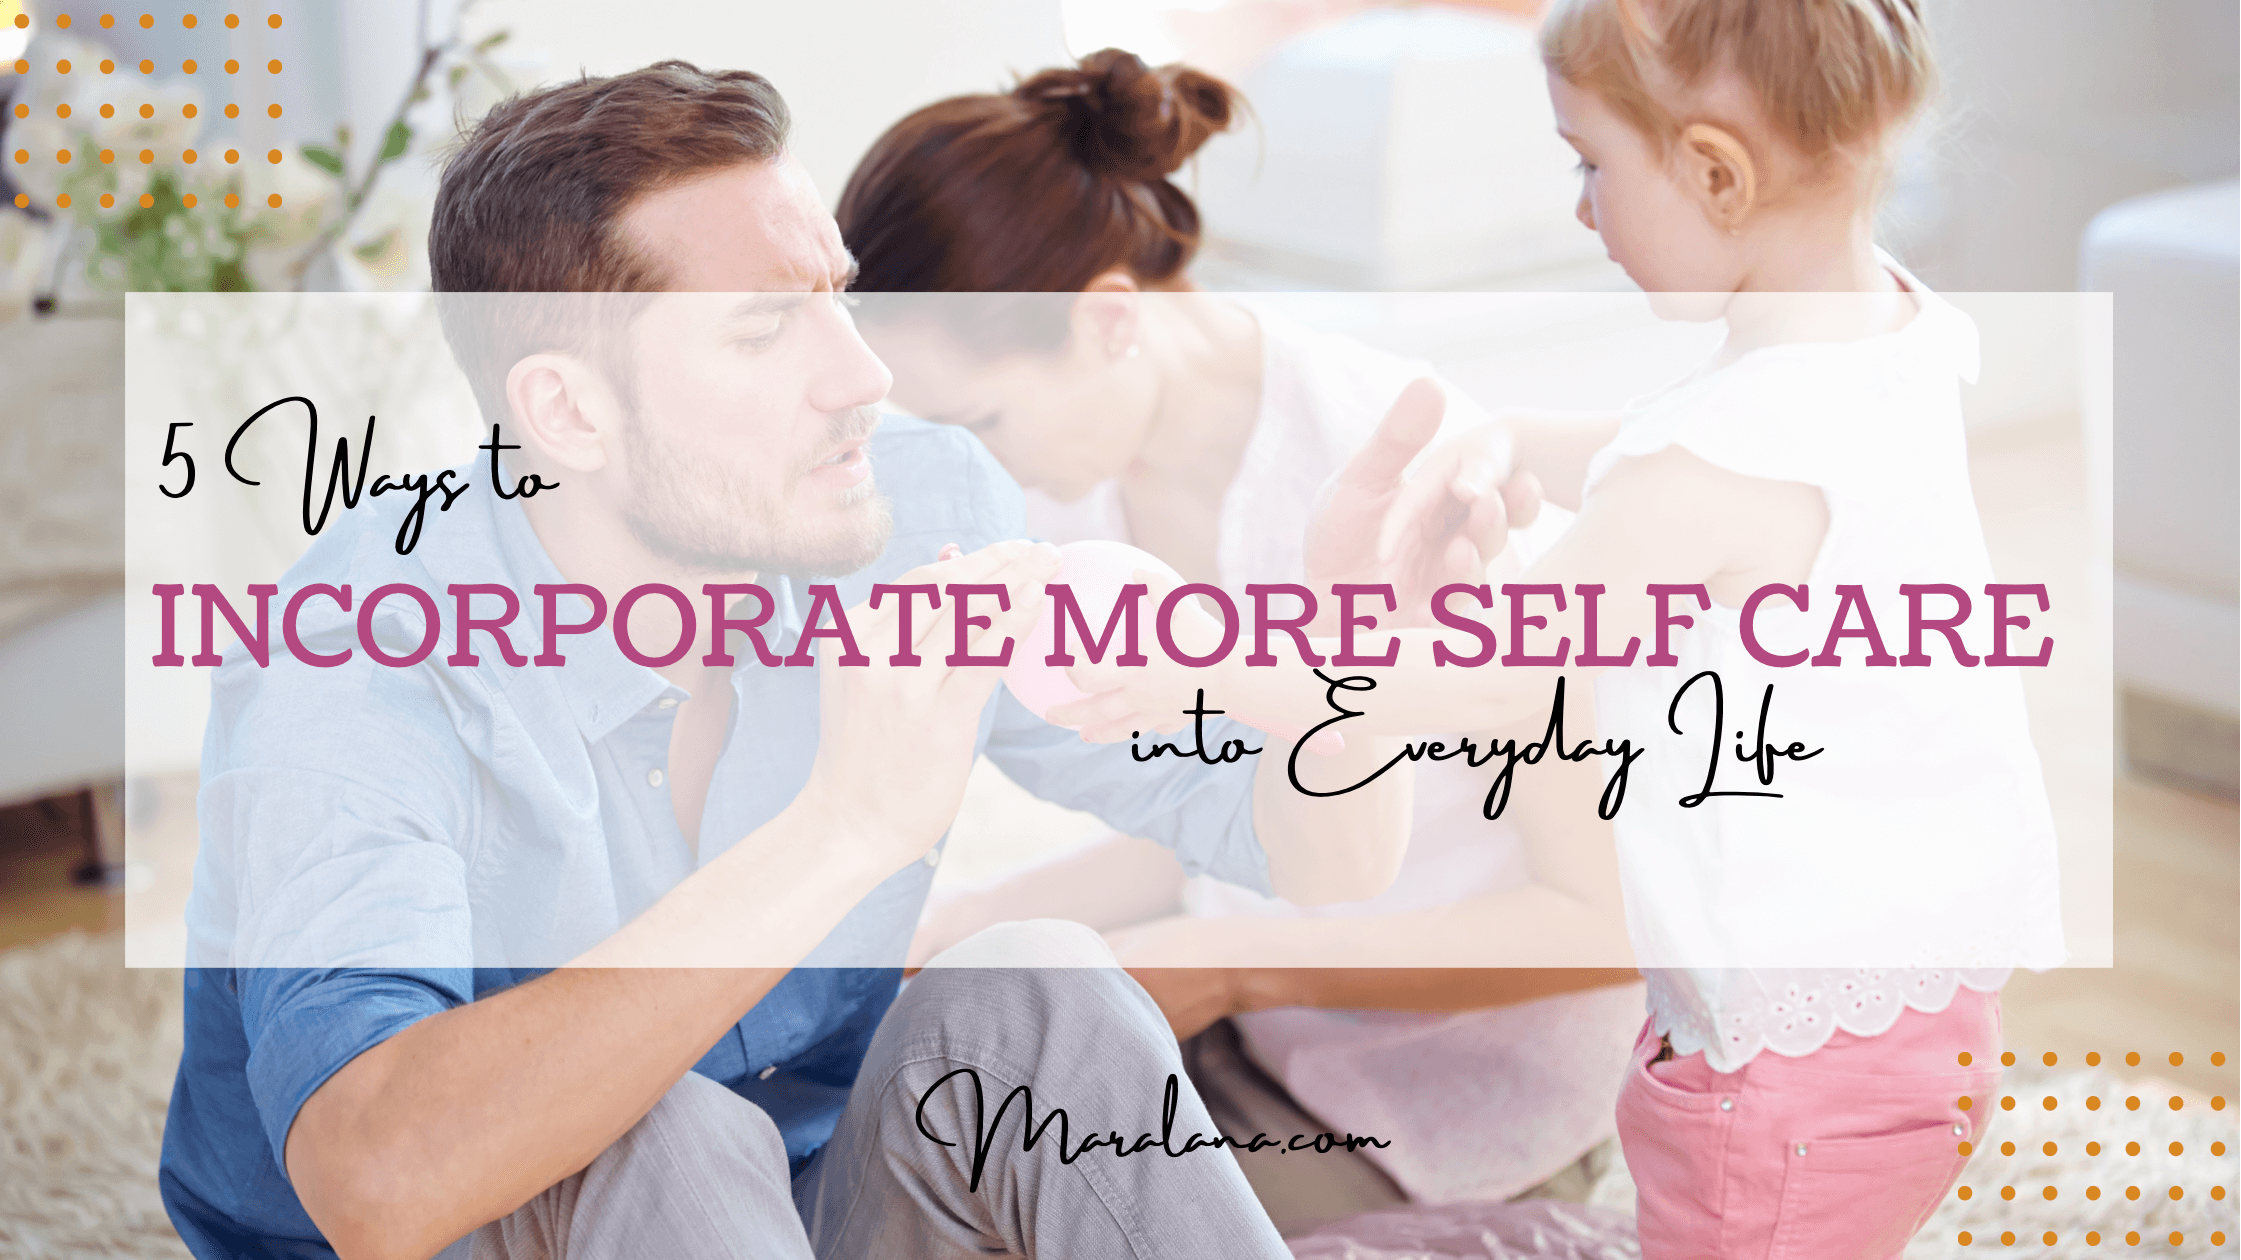 5 Ways to Incorporate More Self Care into Everyday Life